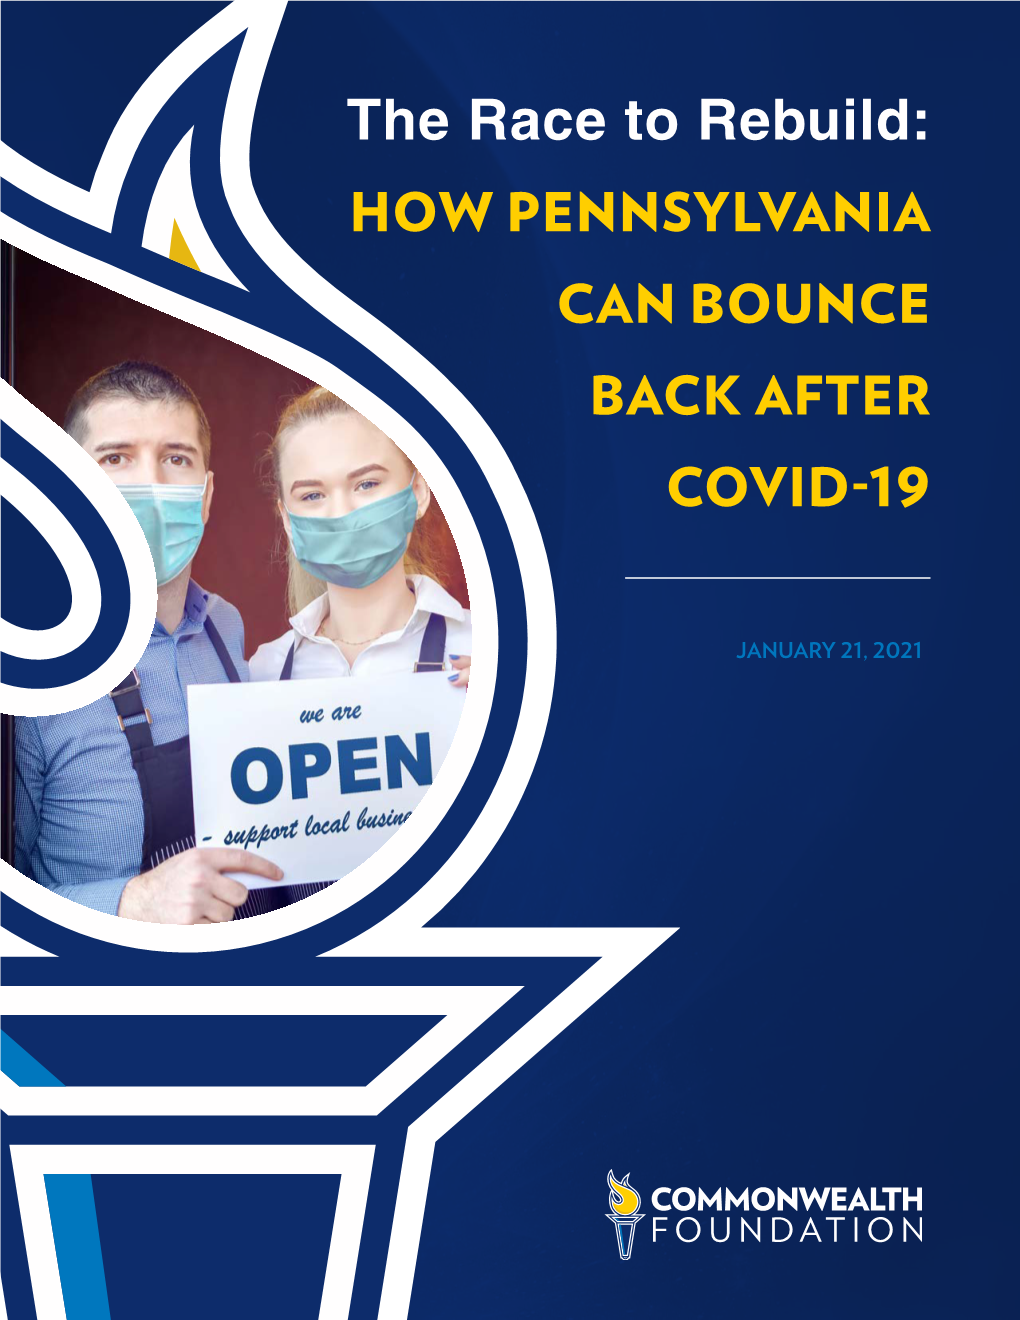 The Race to Rebuild: HOW PENNSYLVANIA CAN BOUNCE BACK AFTER COVID!"